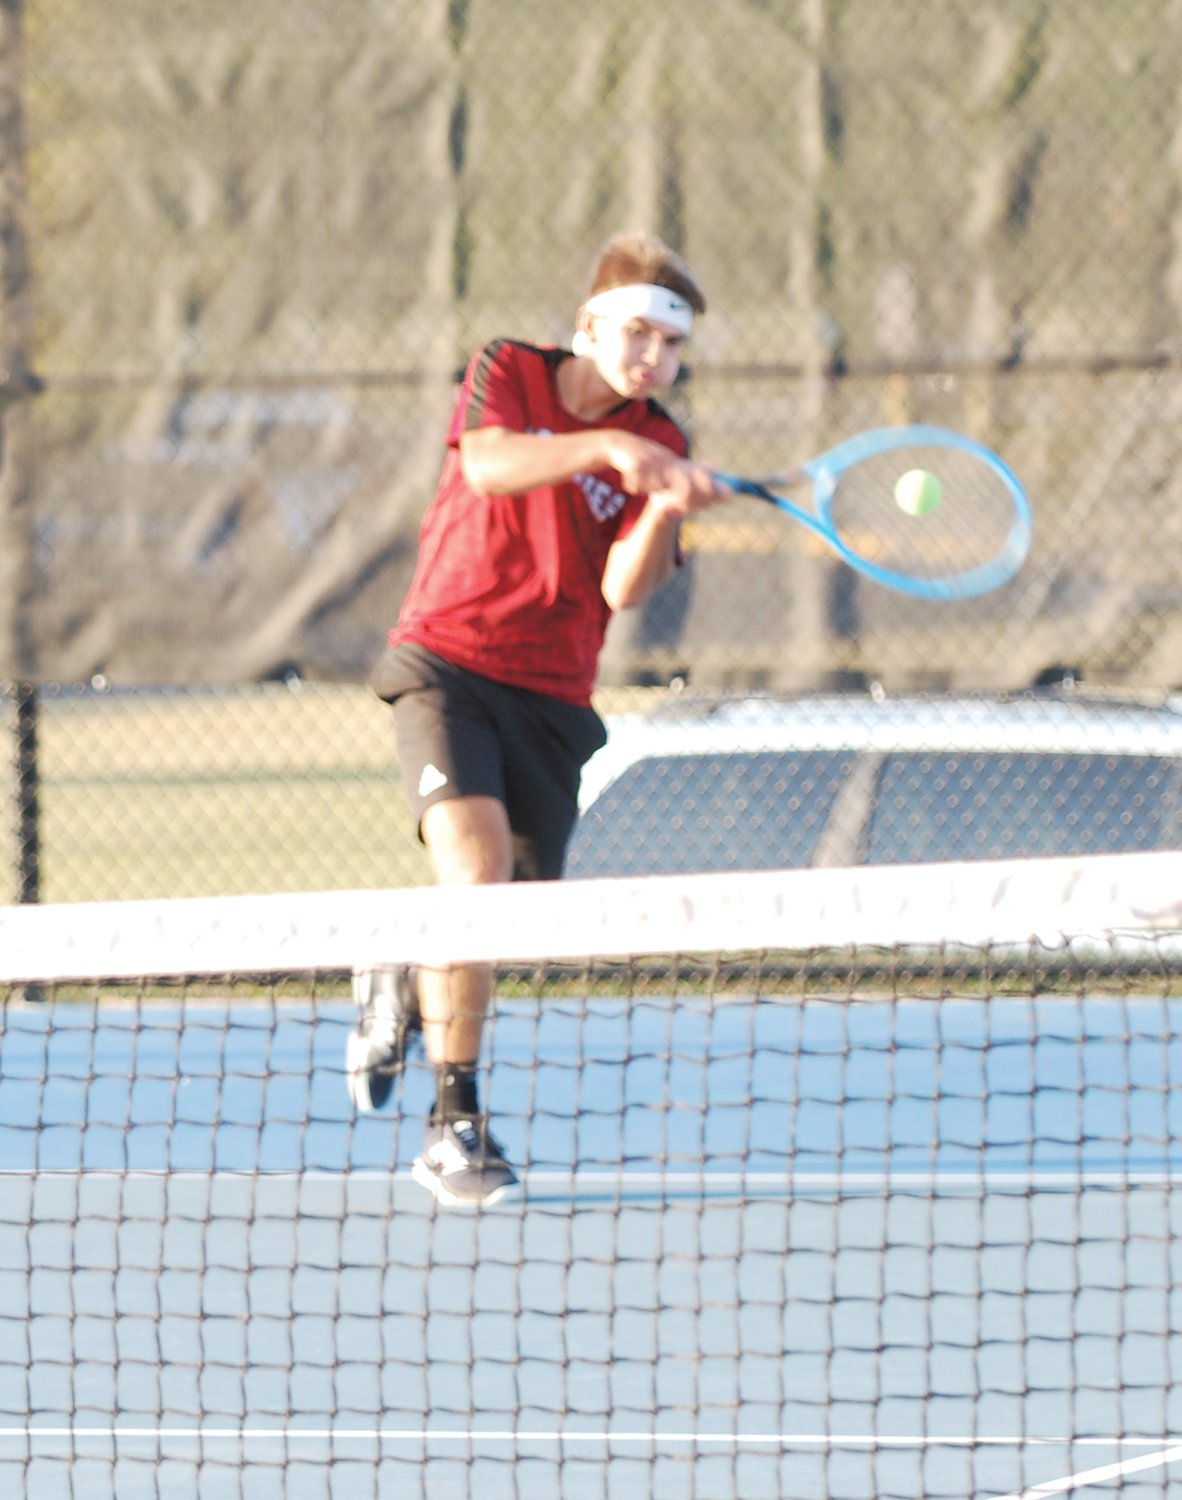 Southmont's Adam Cox dropped a 6-3, 6-4 match to Fountain Central's Carson Eberly to see his sophomore campaign come to a close. Cox won 18 matches on the season.